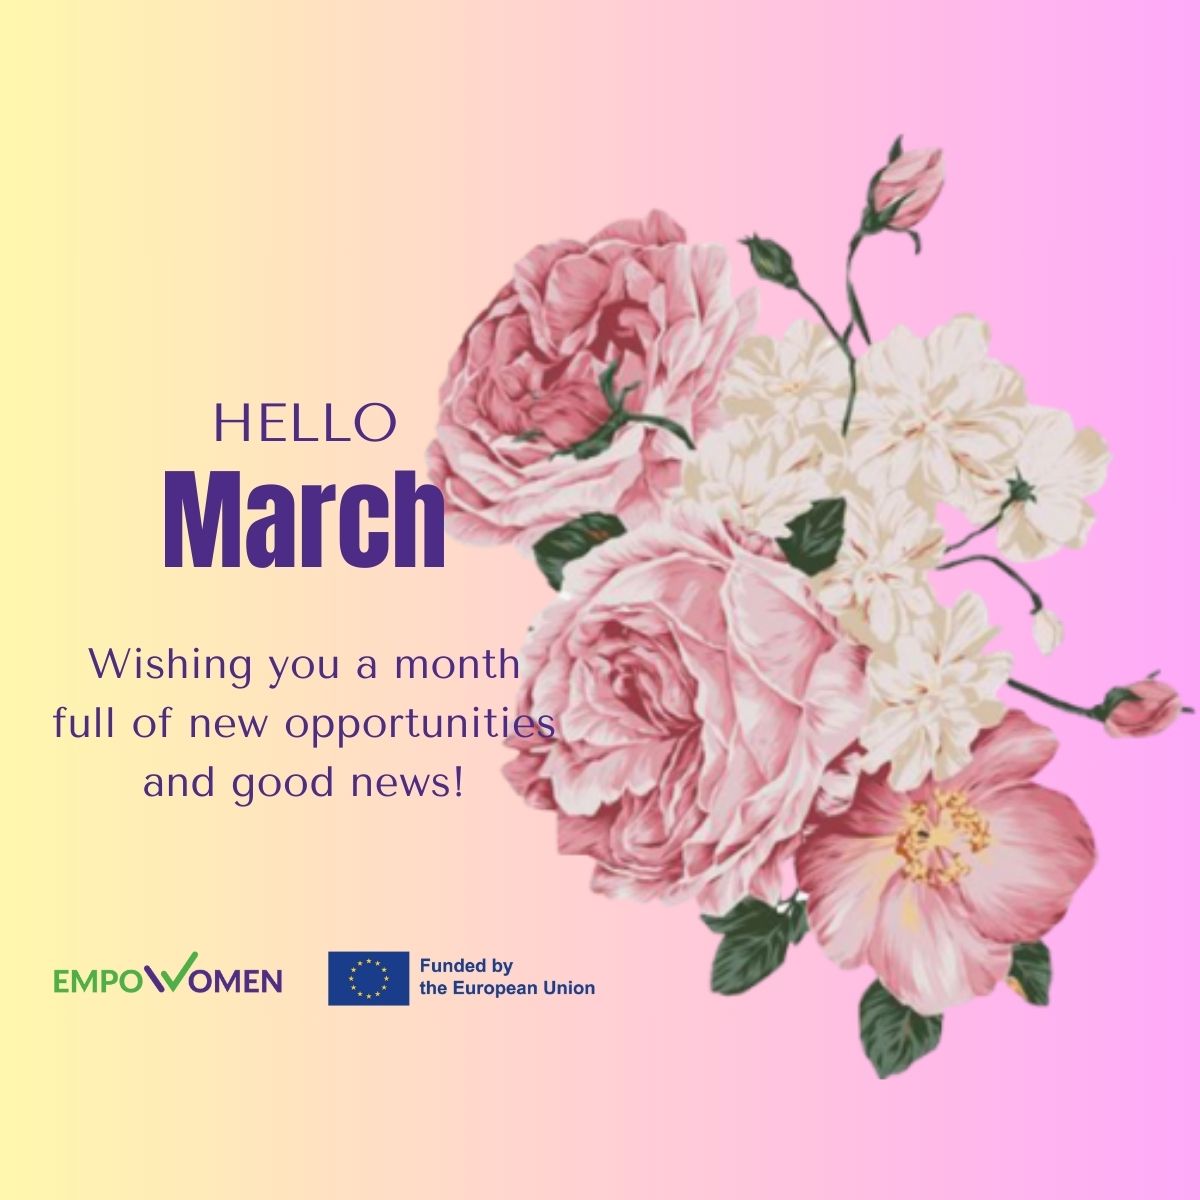 Happy Spring to everyone!

A kind reminder: ONE week left before the deadline for applying for EmpoWomen Program. Applications within the first Open Call will be accepted until March 8, 17:00 CET. Good luck to participants!

empowomen.eu

#EmpoWomen #Investment